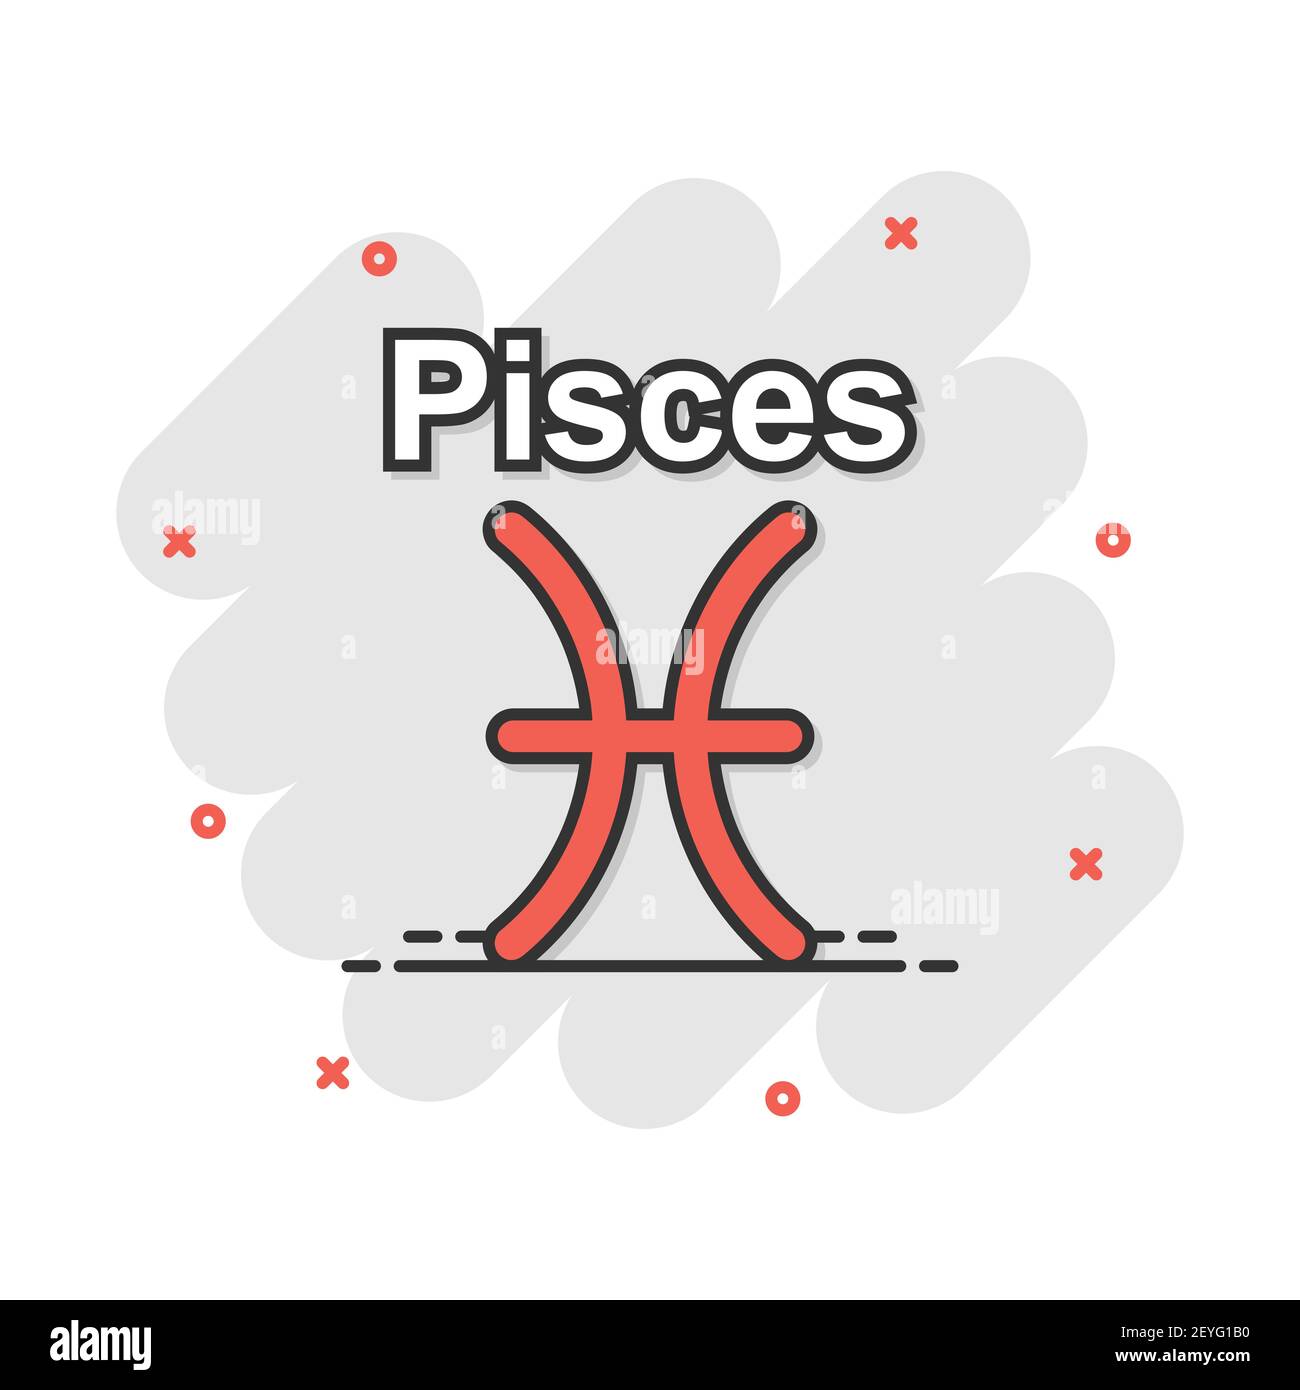 Vector cartoon pisces zodiac icon in comic style. Astrology sign illustration pictogram. Pisces horoscope business splash effect concept. Stock Vector